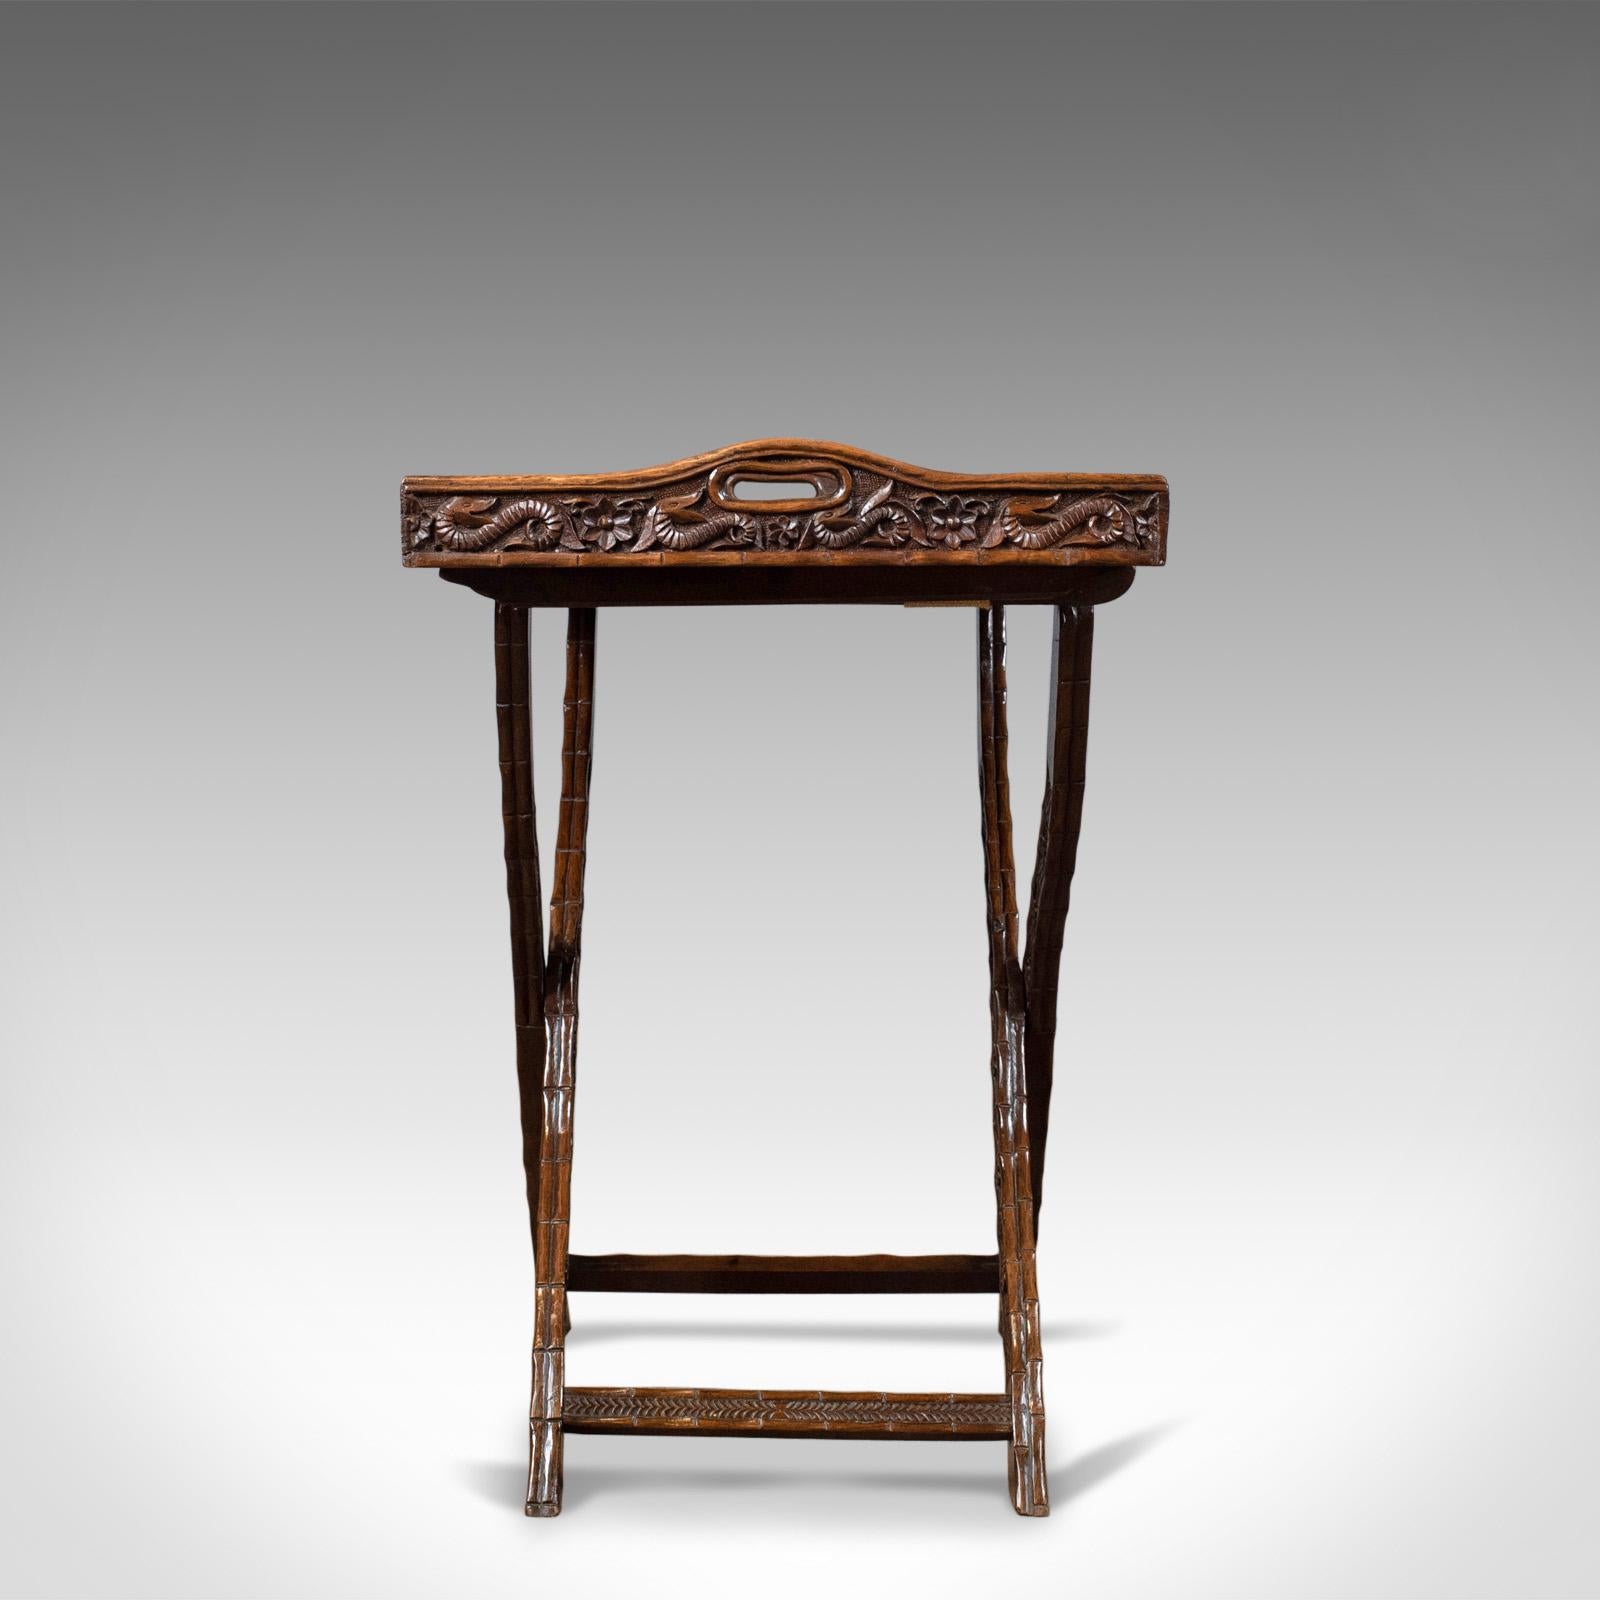 Victorian Antique Butler's Tray Table, Carved, Oriental Teak, Folding Stand, circa 1900